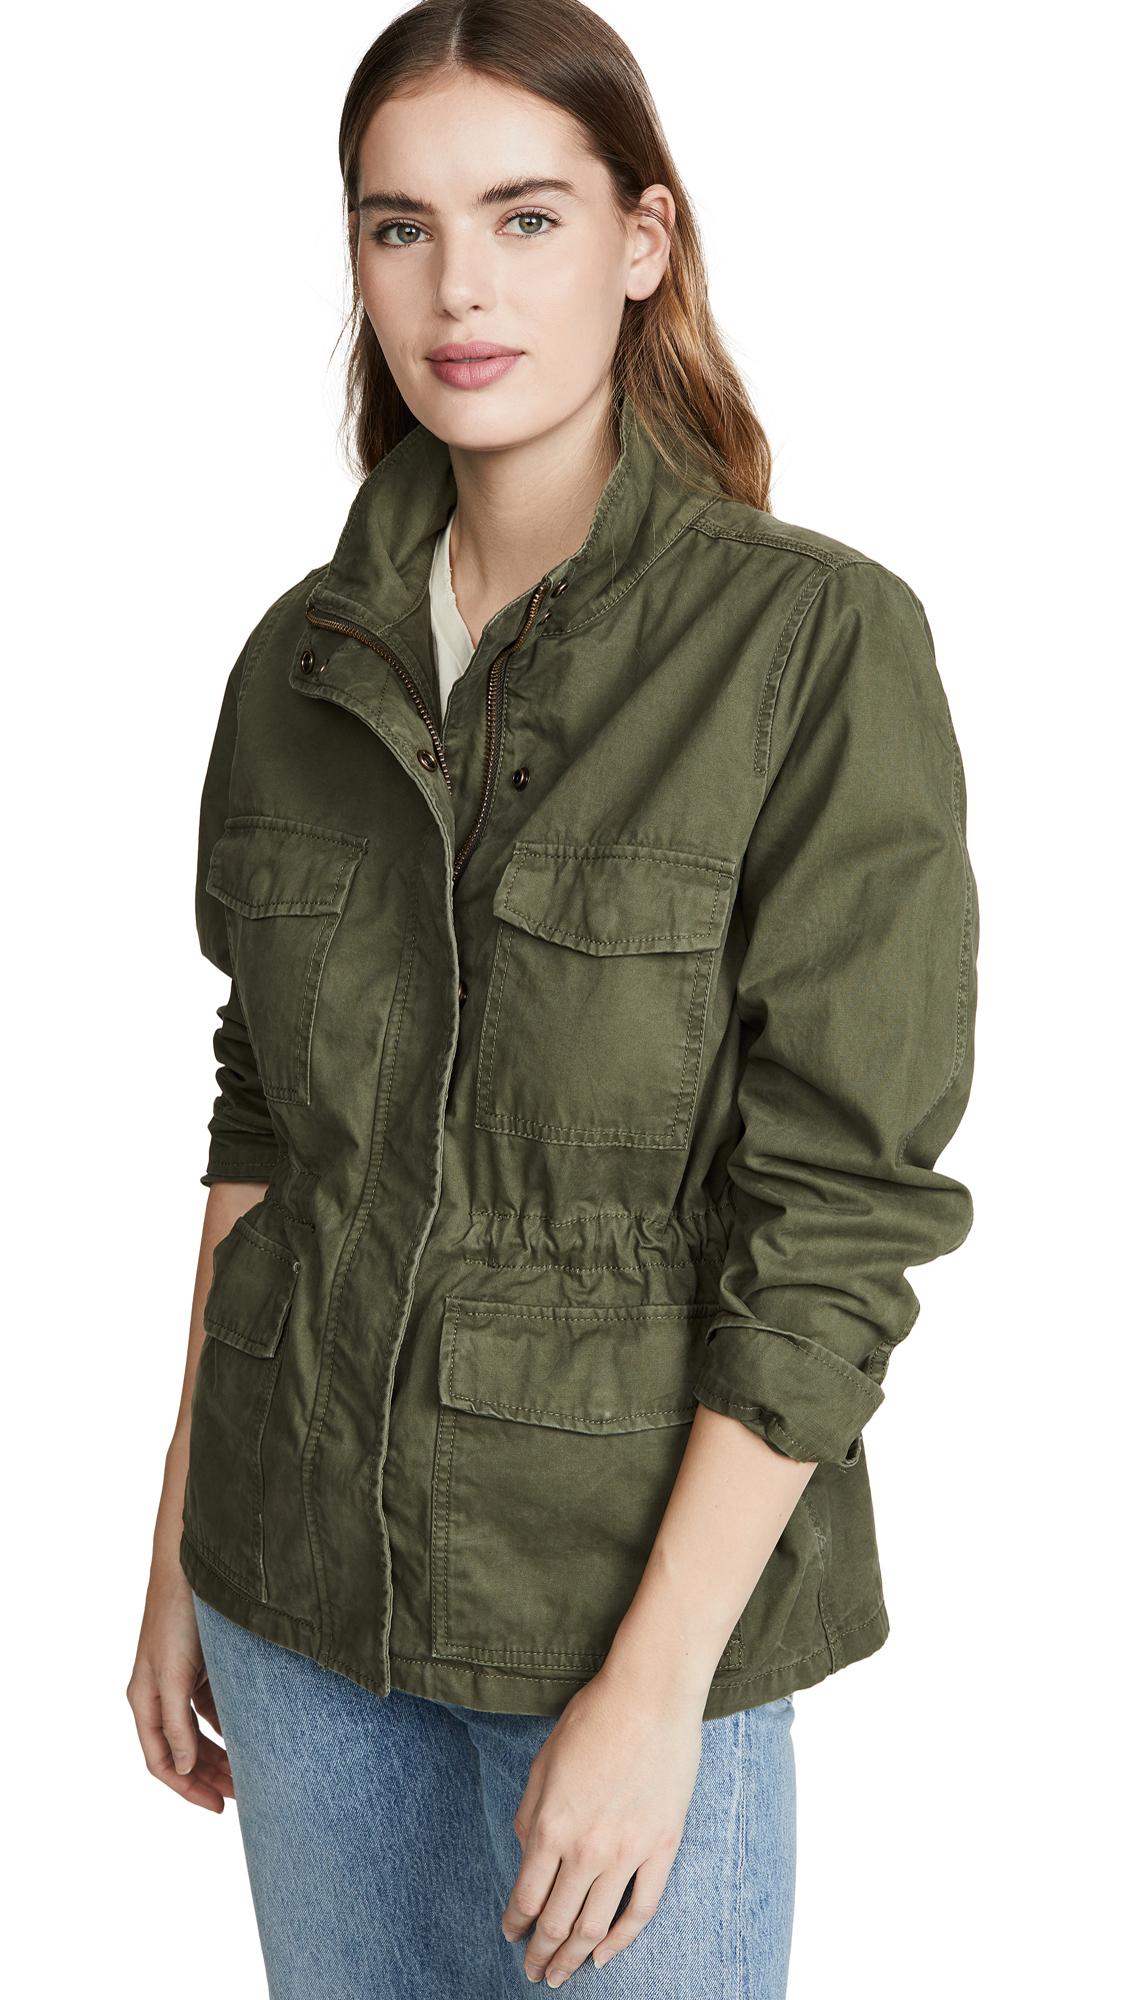 Madewell Cotton Surplus Jacket in Green - Lyst